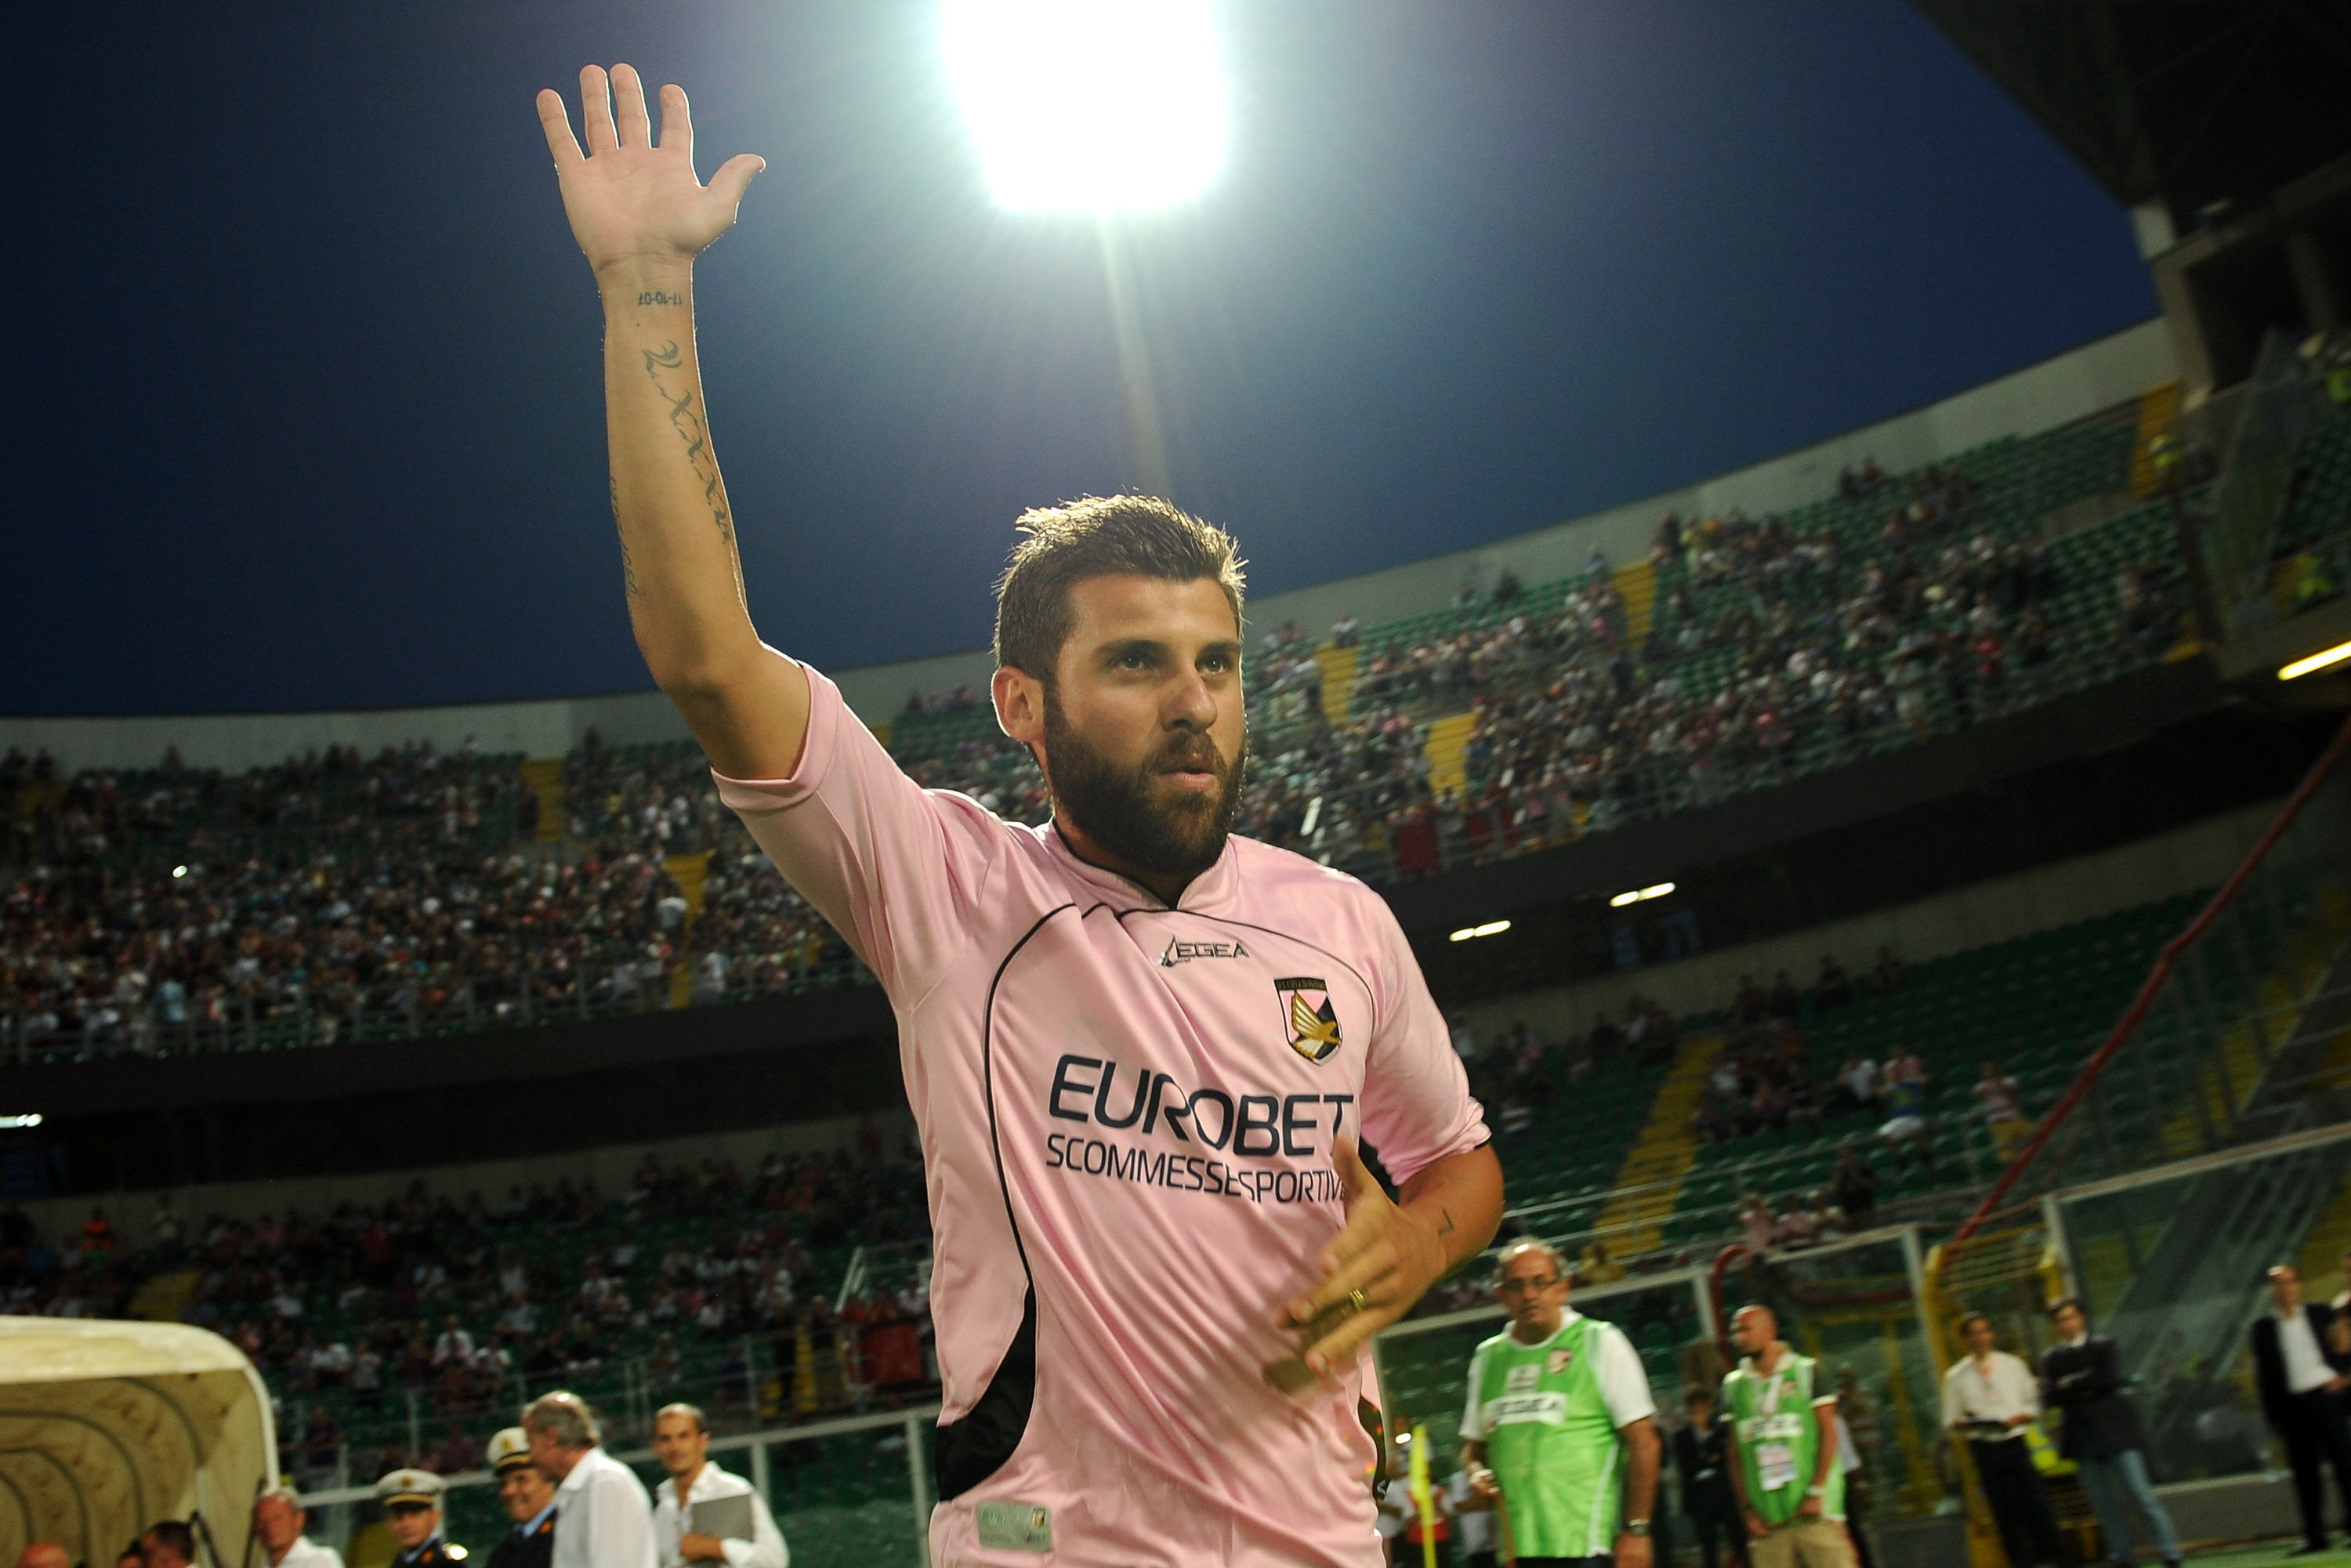 PALERMO, ITALY - AUGUST 12: Antonio Nocerino of Palermo greets supporters during the presentation of Palermo team before the pre season friendly tournament "A.R.S. Trophy" between US Citta di Palermo, SSC Napoli and Valencia CF at Stadio Renzo Barbera on August 12, 2010 in Palermo, Italy.  (Photo by Tullio M. Puglia/Getty Images)